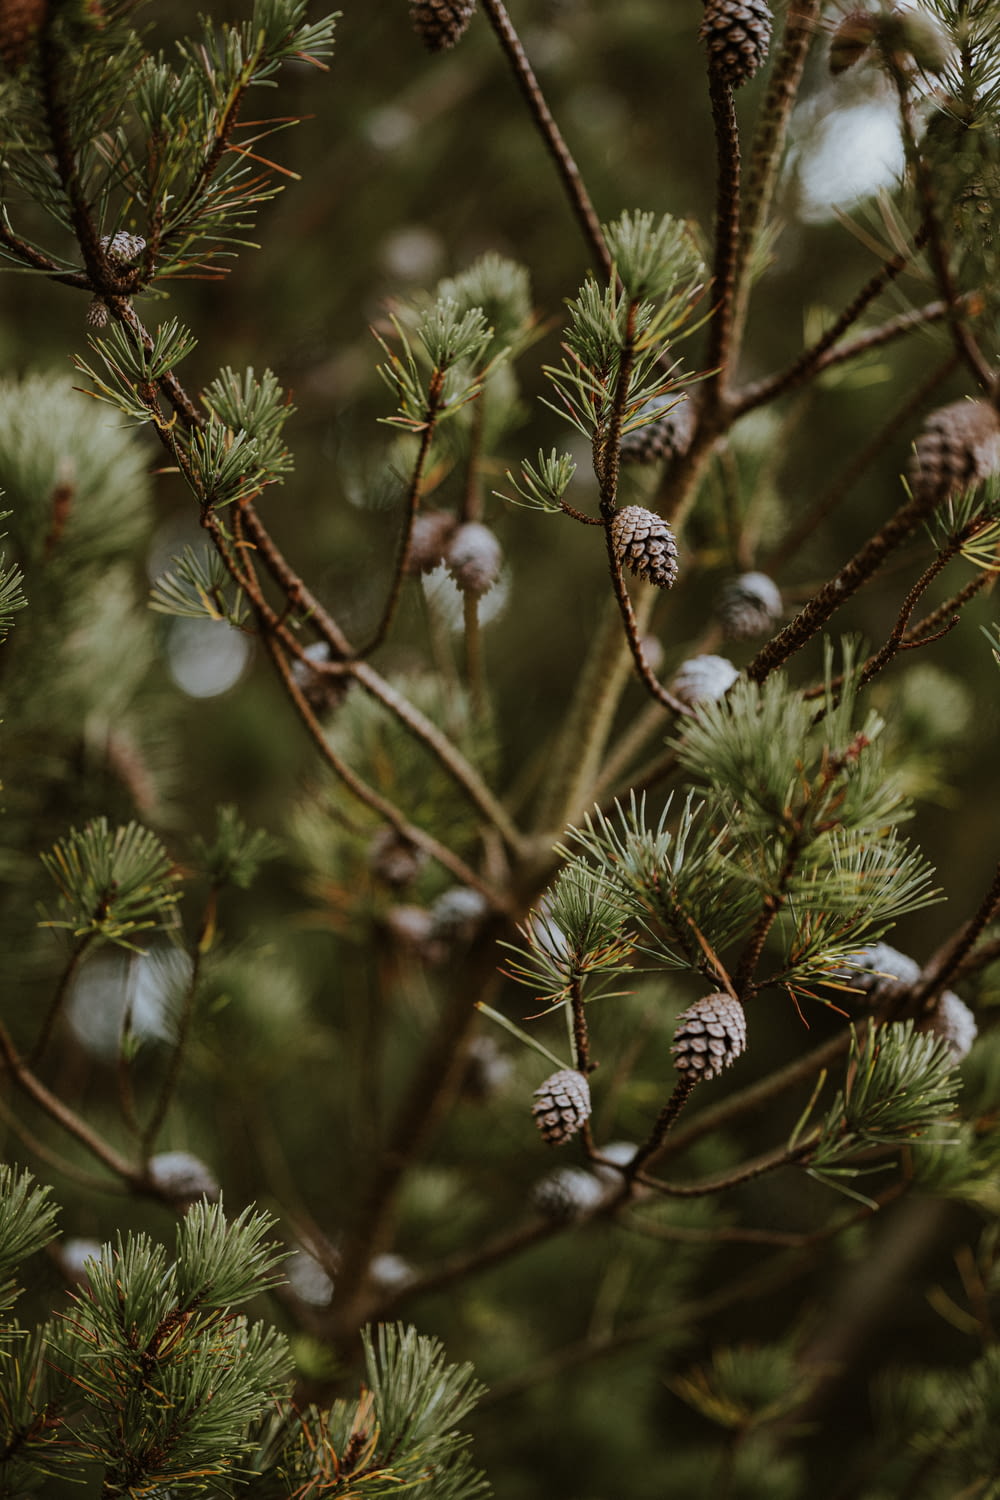 a close up of a pine tree with cones on it